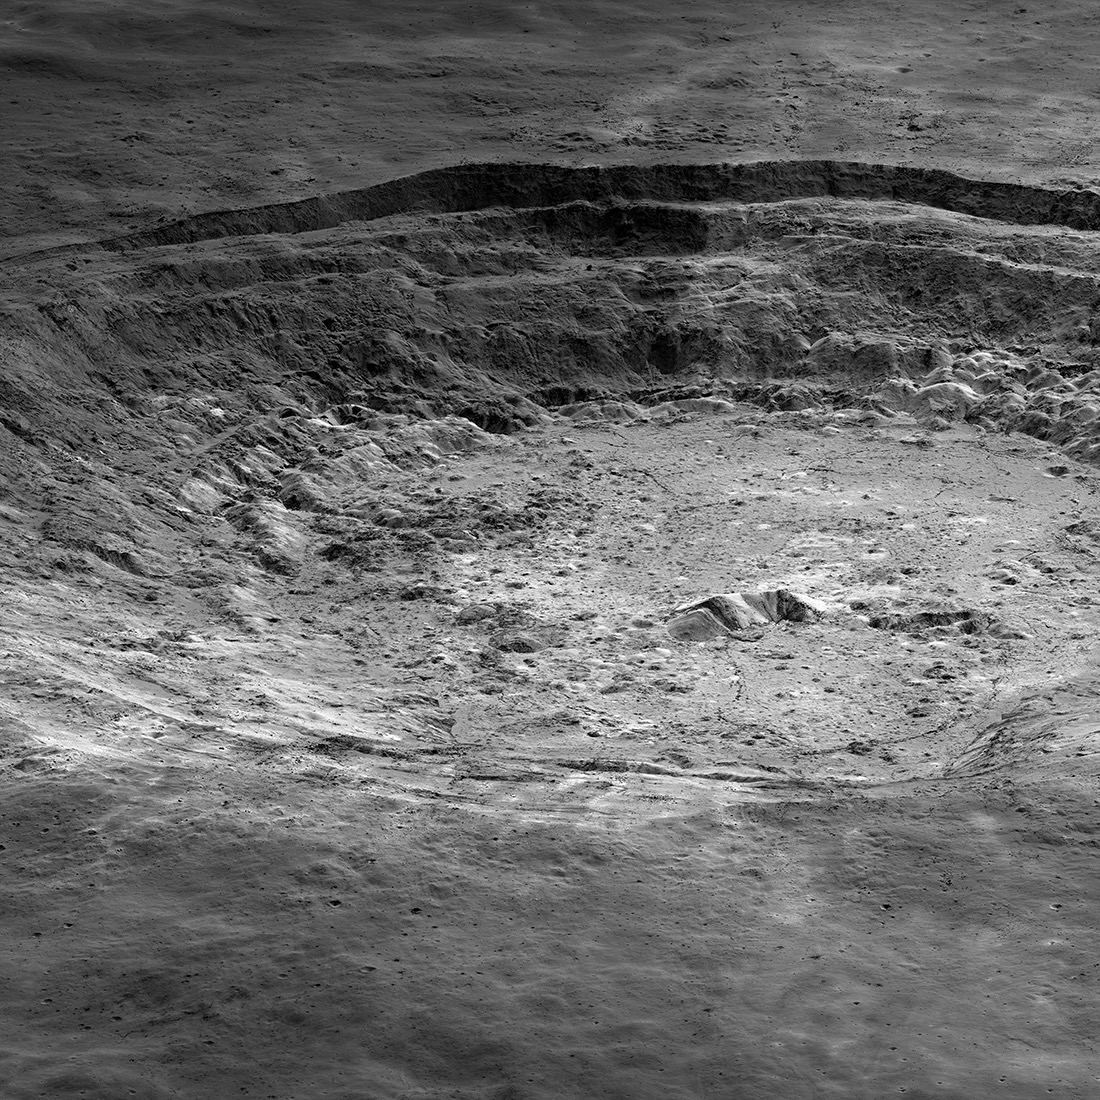 terraced sides of crater seen from an oblique angle